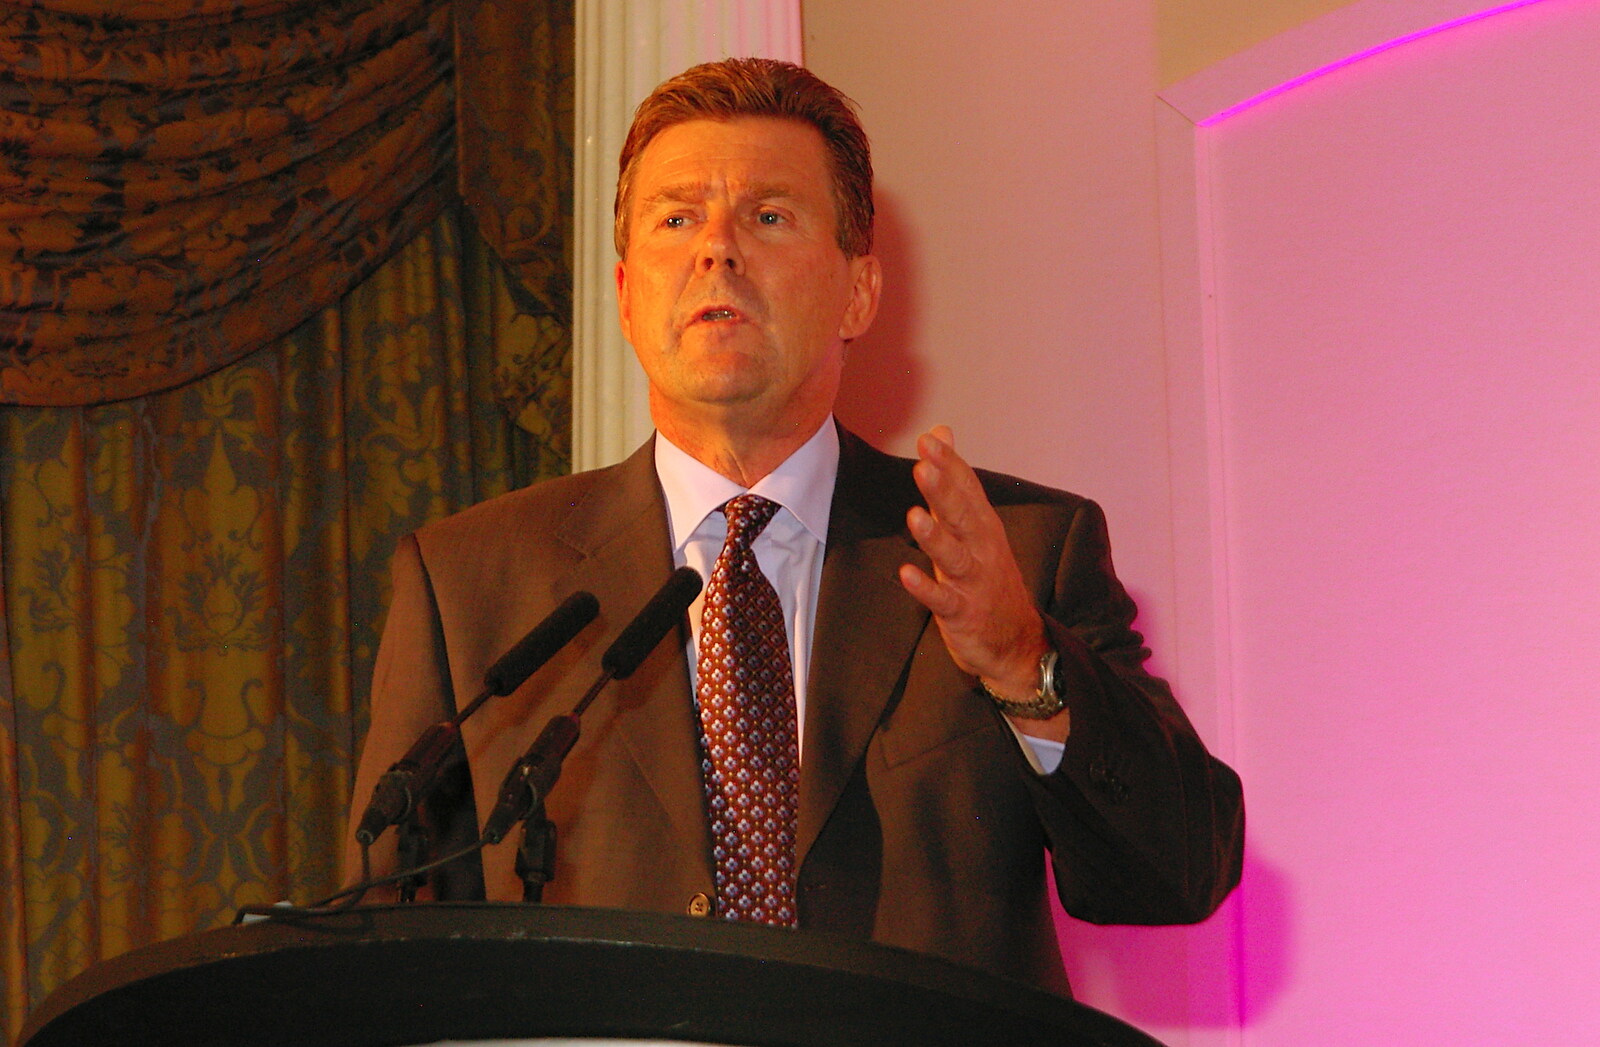 Pertti Johansson opens the presentations from Qualcomm Europe All-Hands at the Berkeley Hotel, London - 9th November 2005